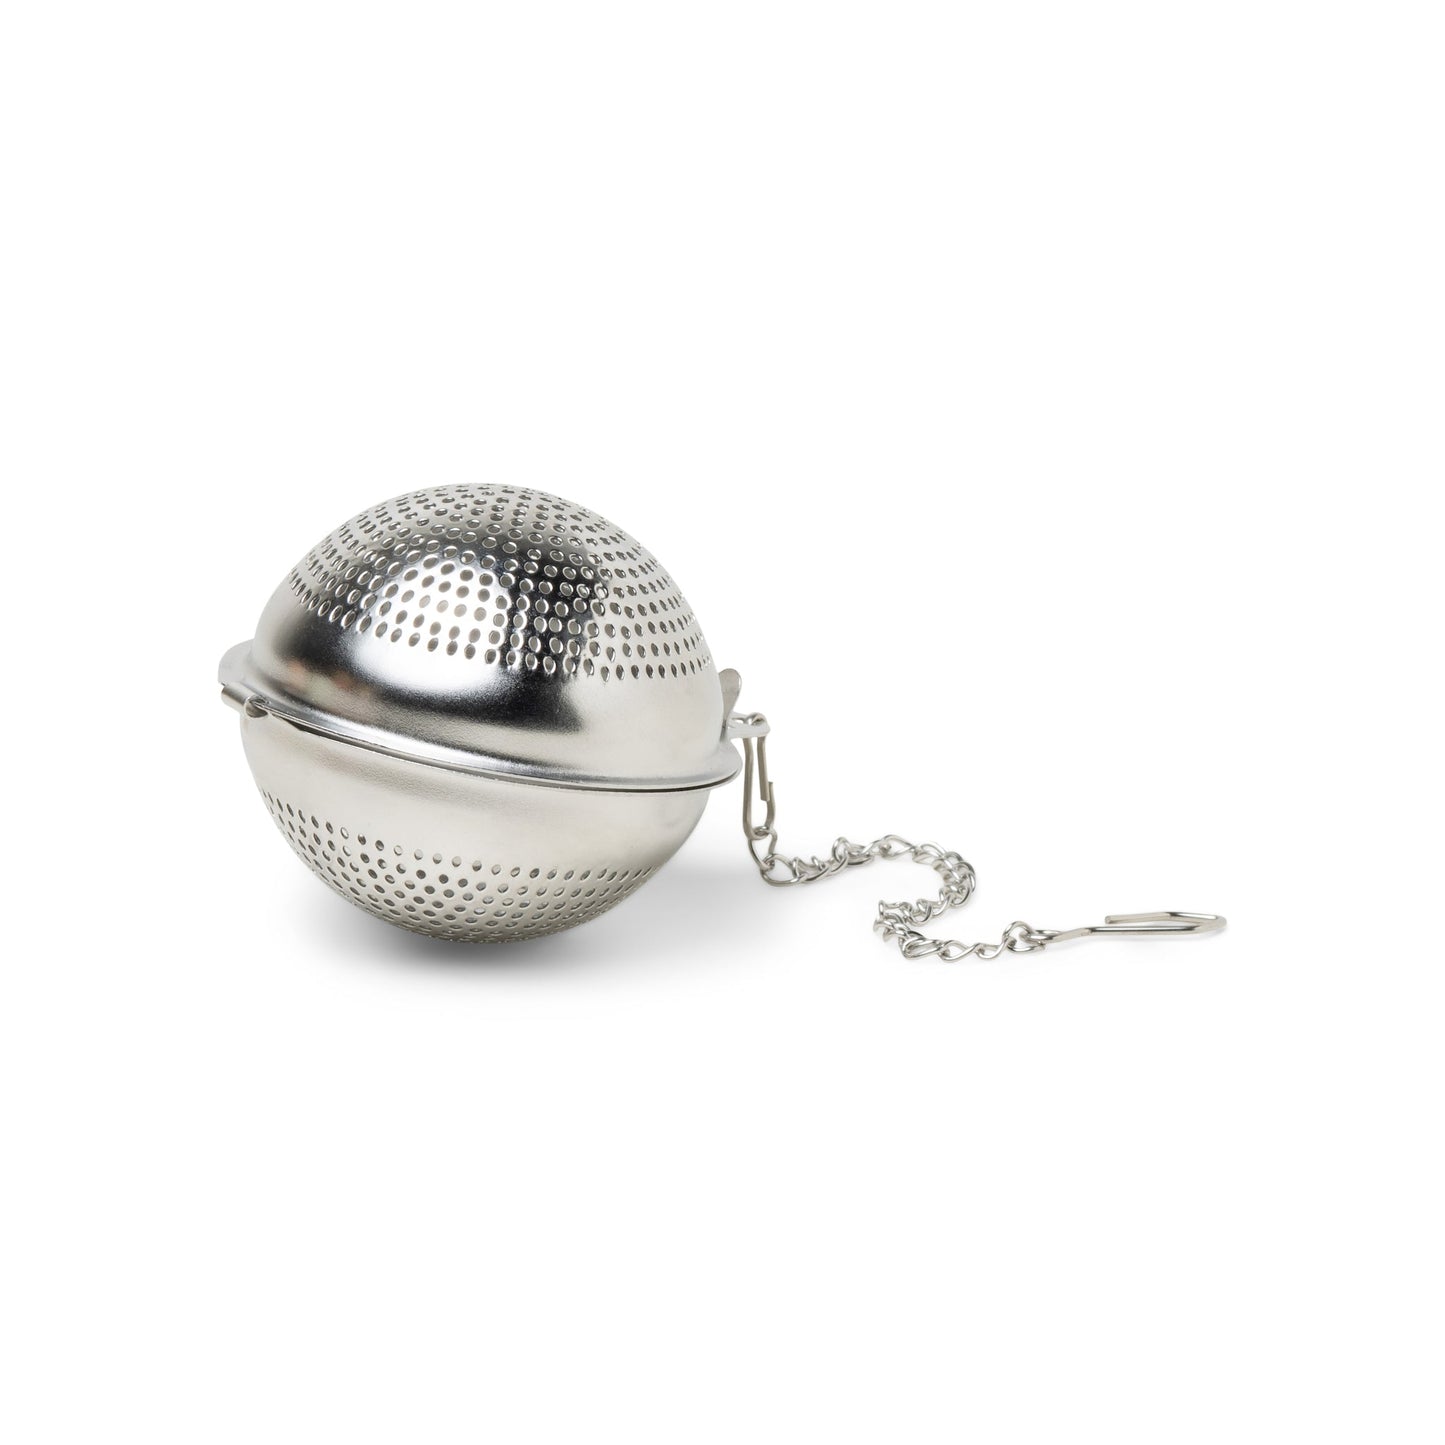 Stainless Stainless Steel Tea Infuser